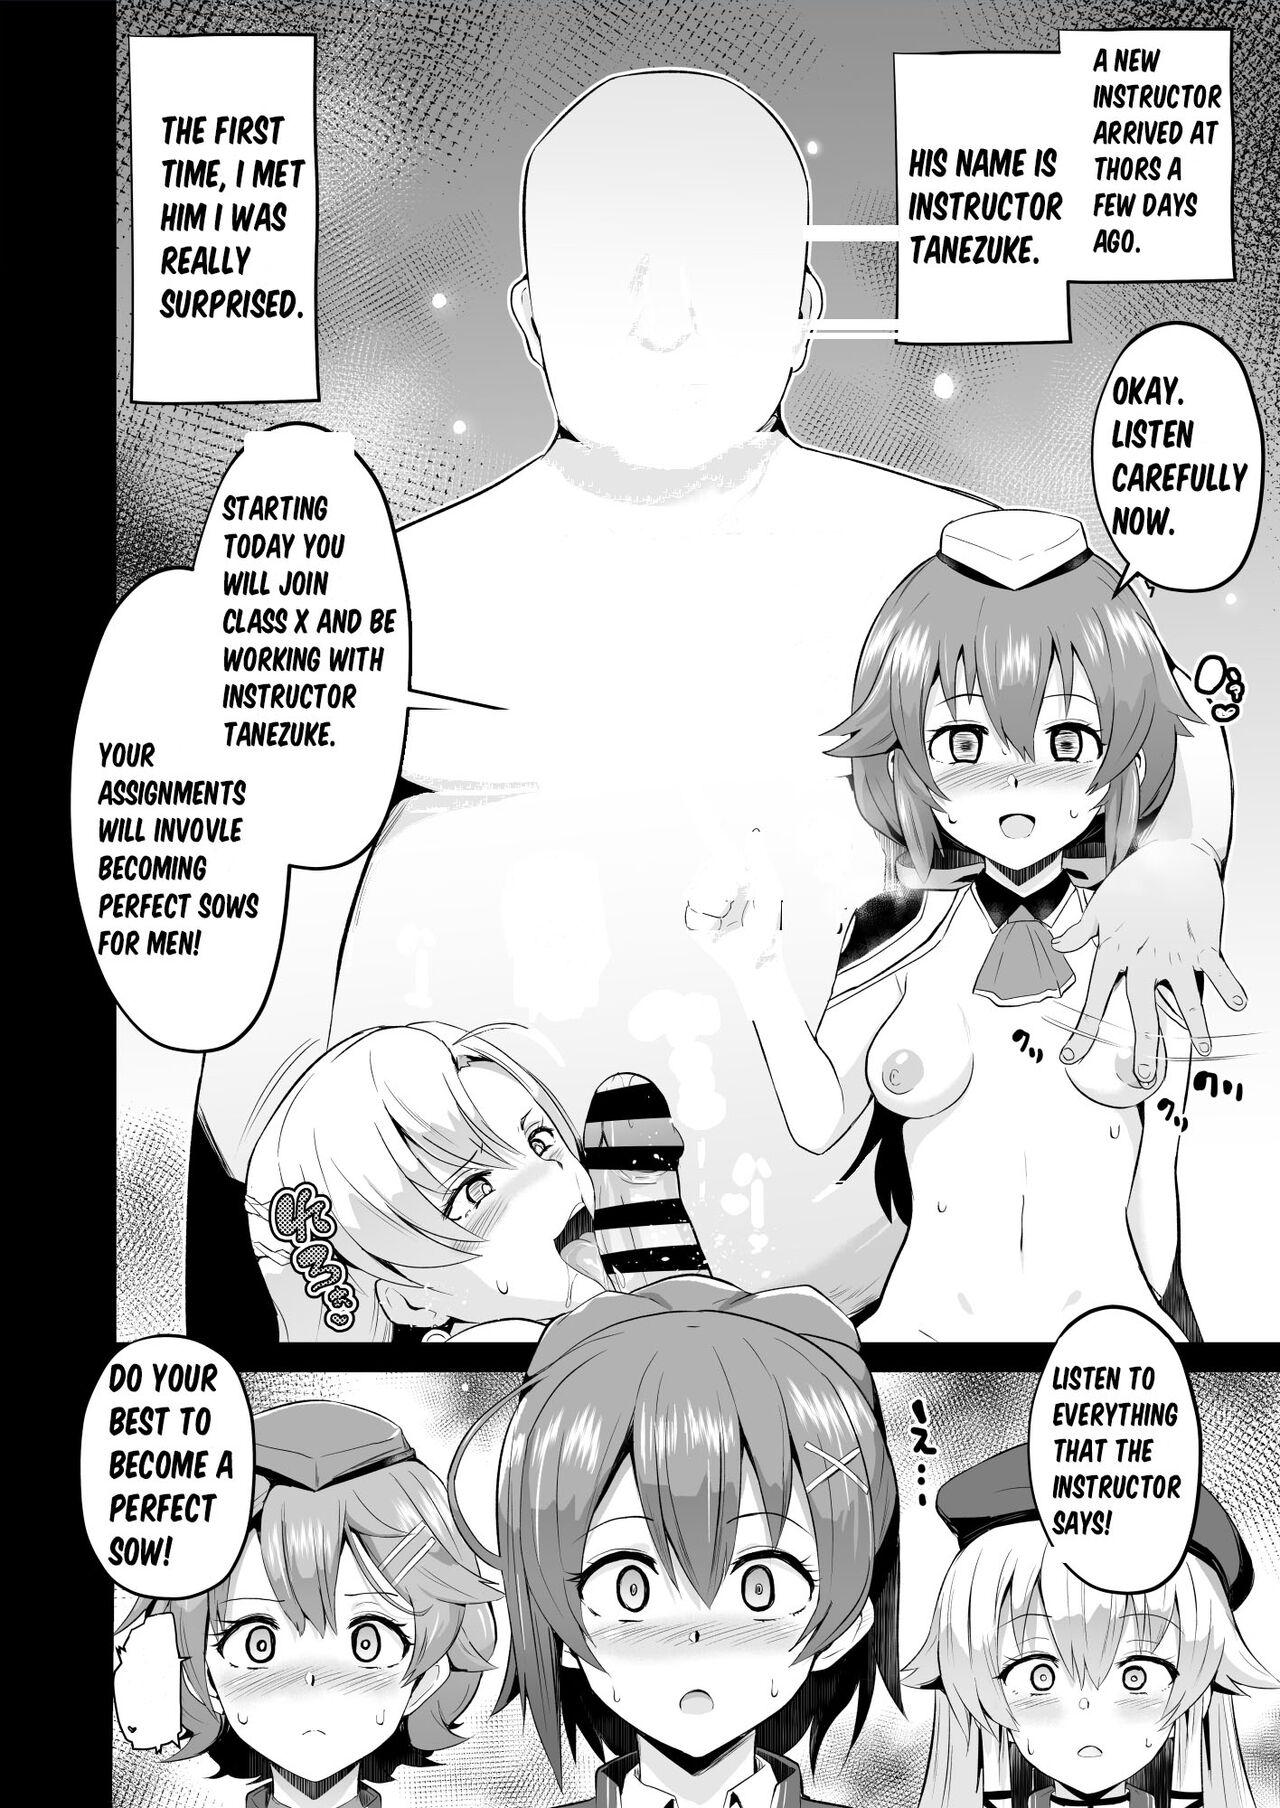 Gaygroup Hypnosis of the New Class VII - Juna's Report - The legend of heroes | eiyuu densetsu Funny - Page 4